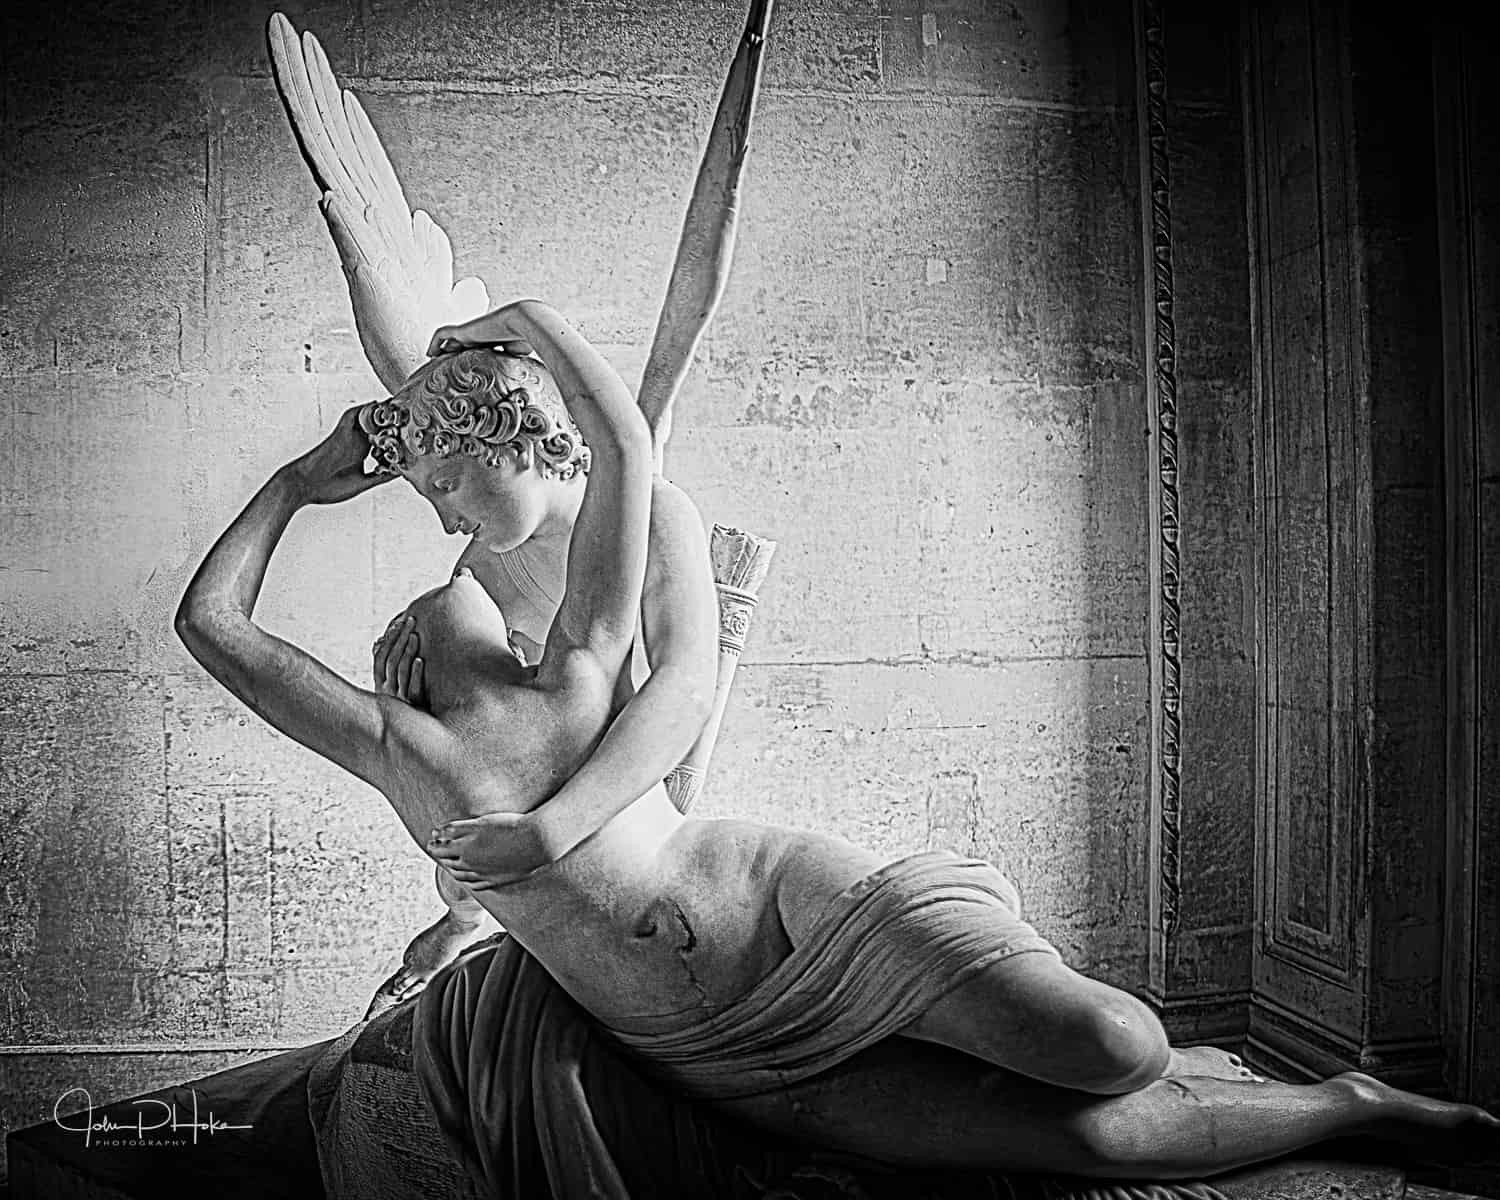 Marble statue in Black and White of Cupid and Psyche embracing from the Louvre Museum, Paris France